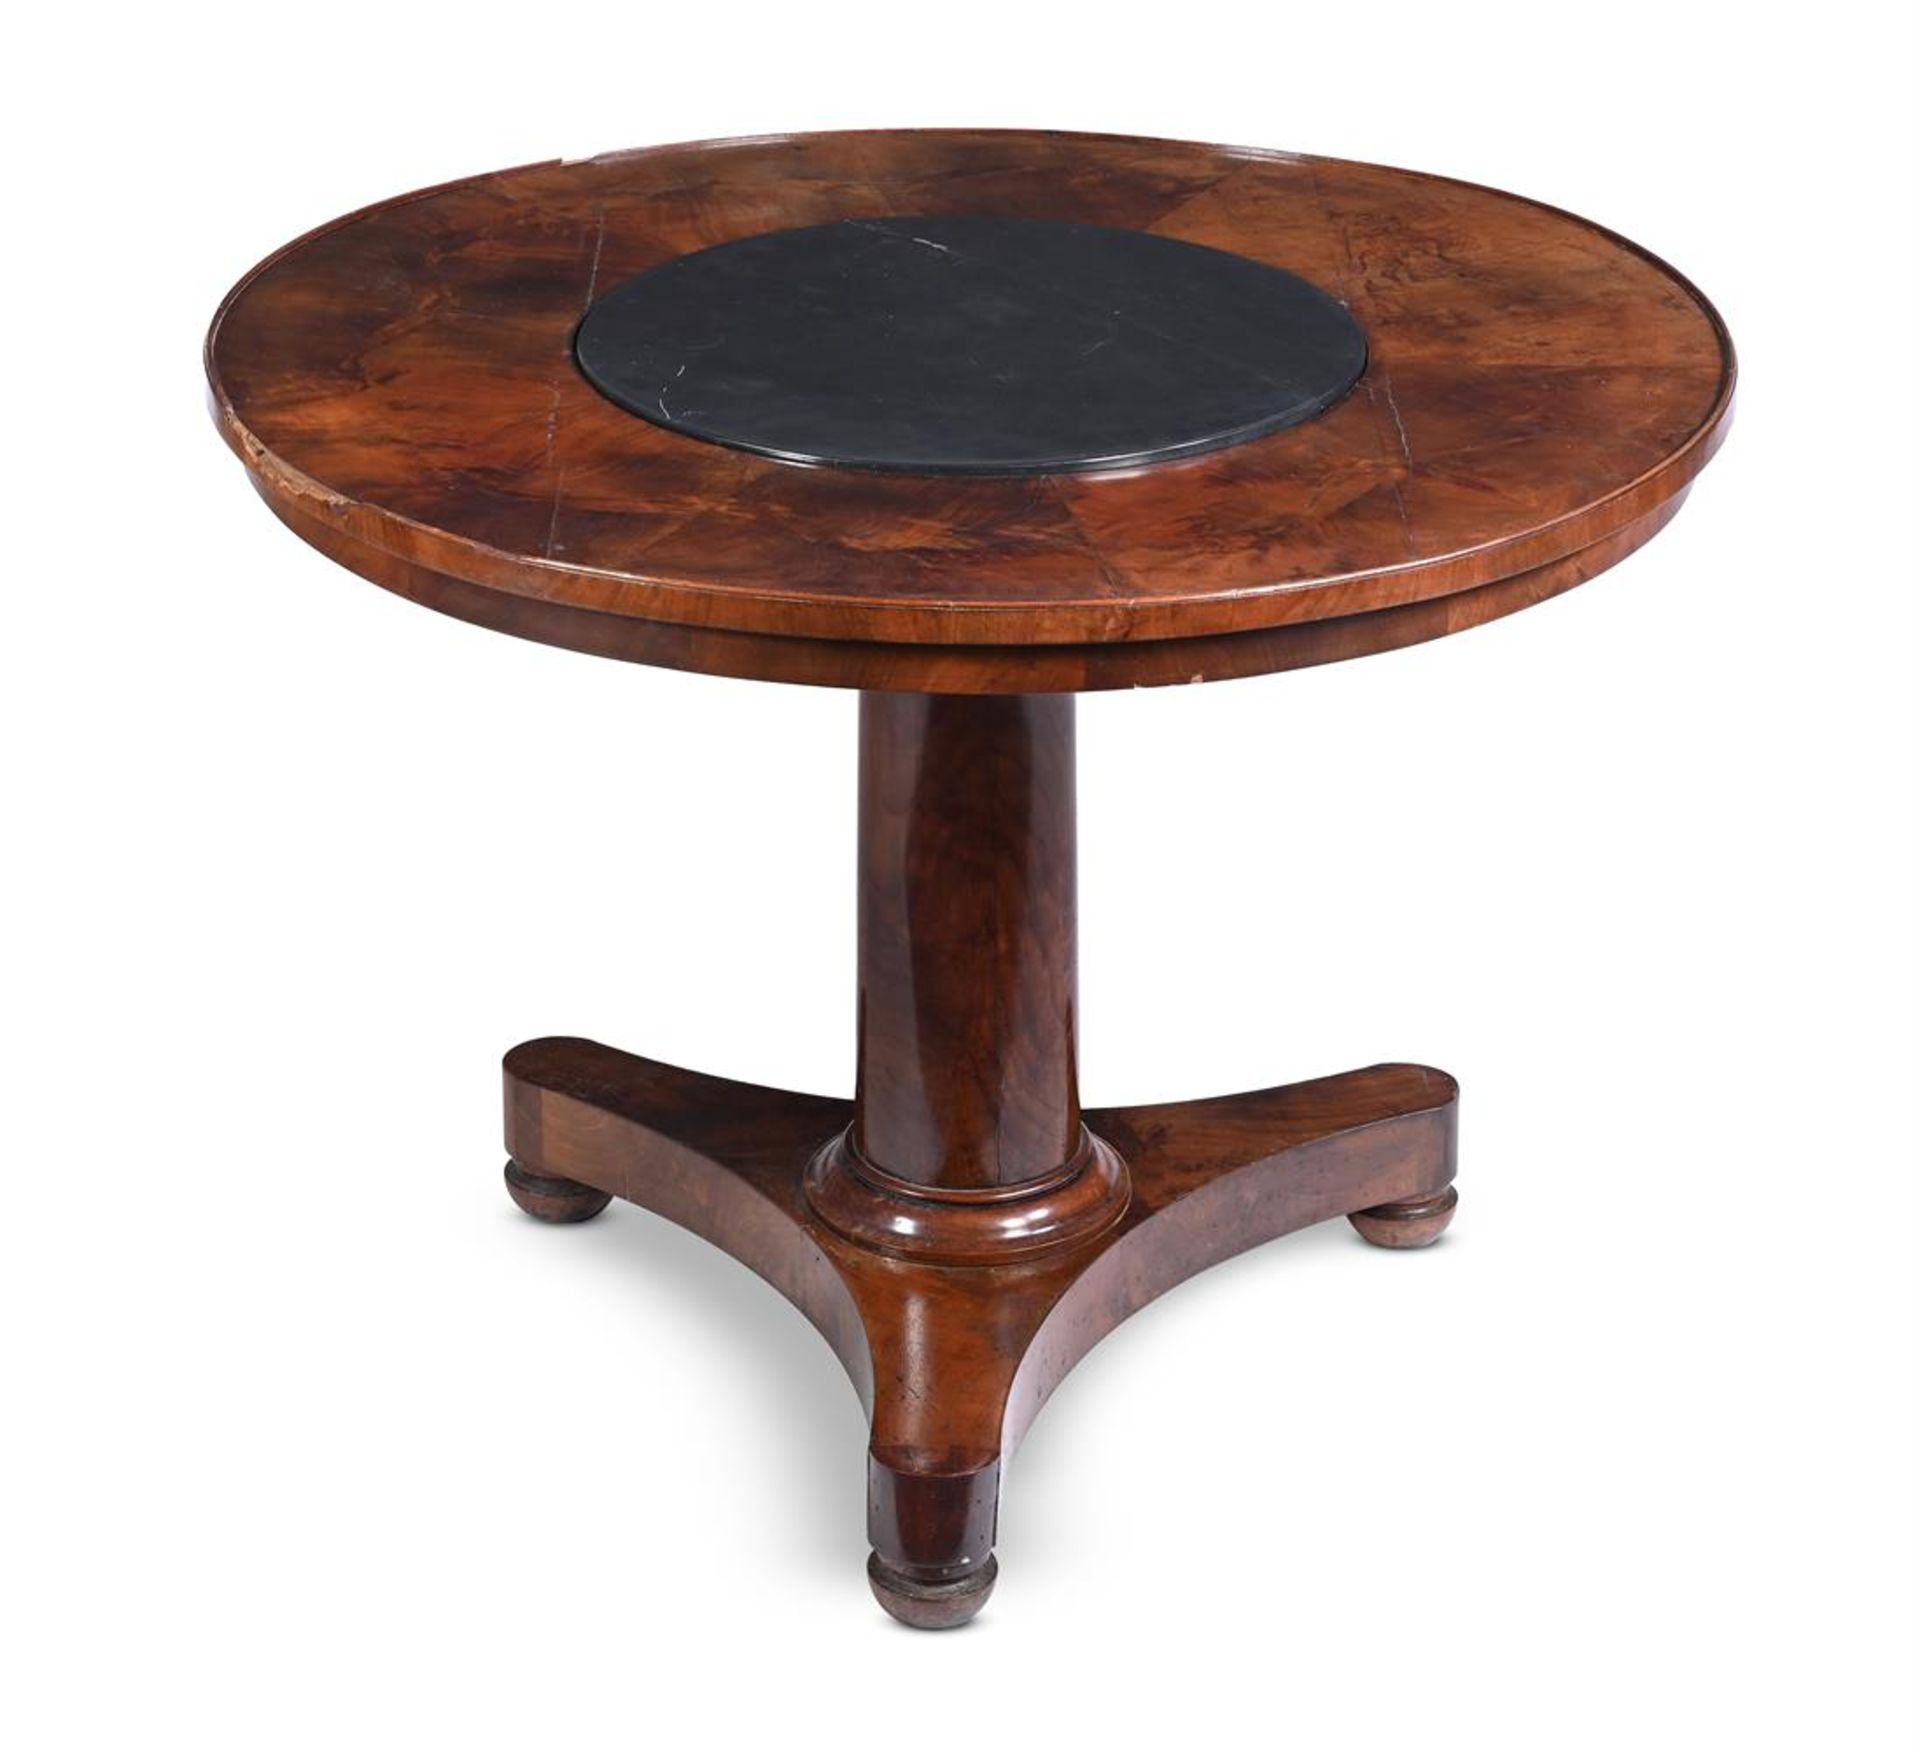 A LOUIS PHILIPPE MAHOGANY AND SLATE CENTRE TABLE, MID 19TH CENTURY